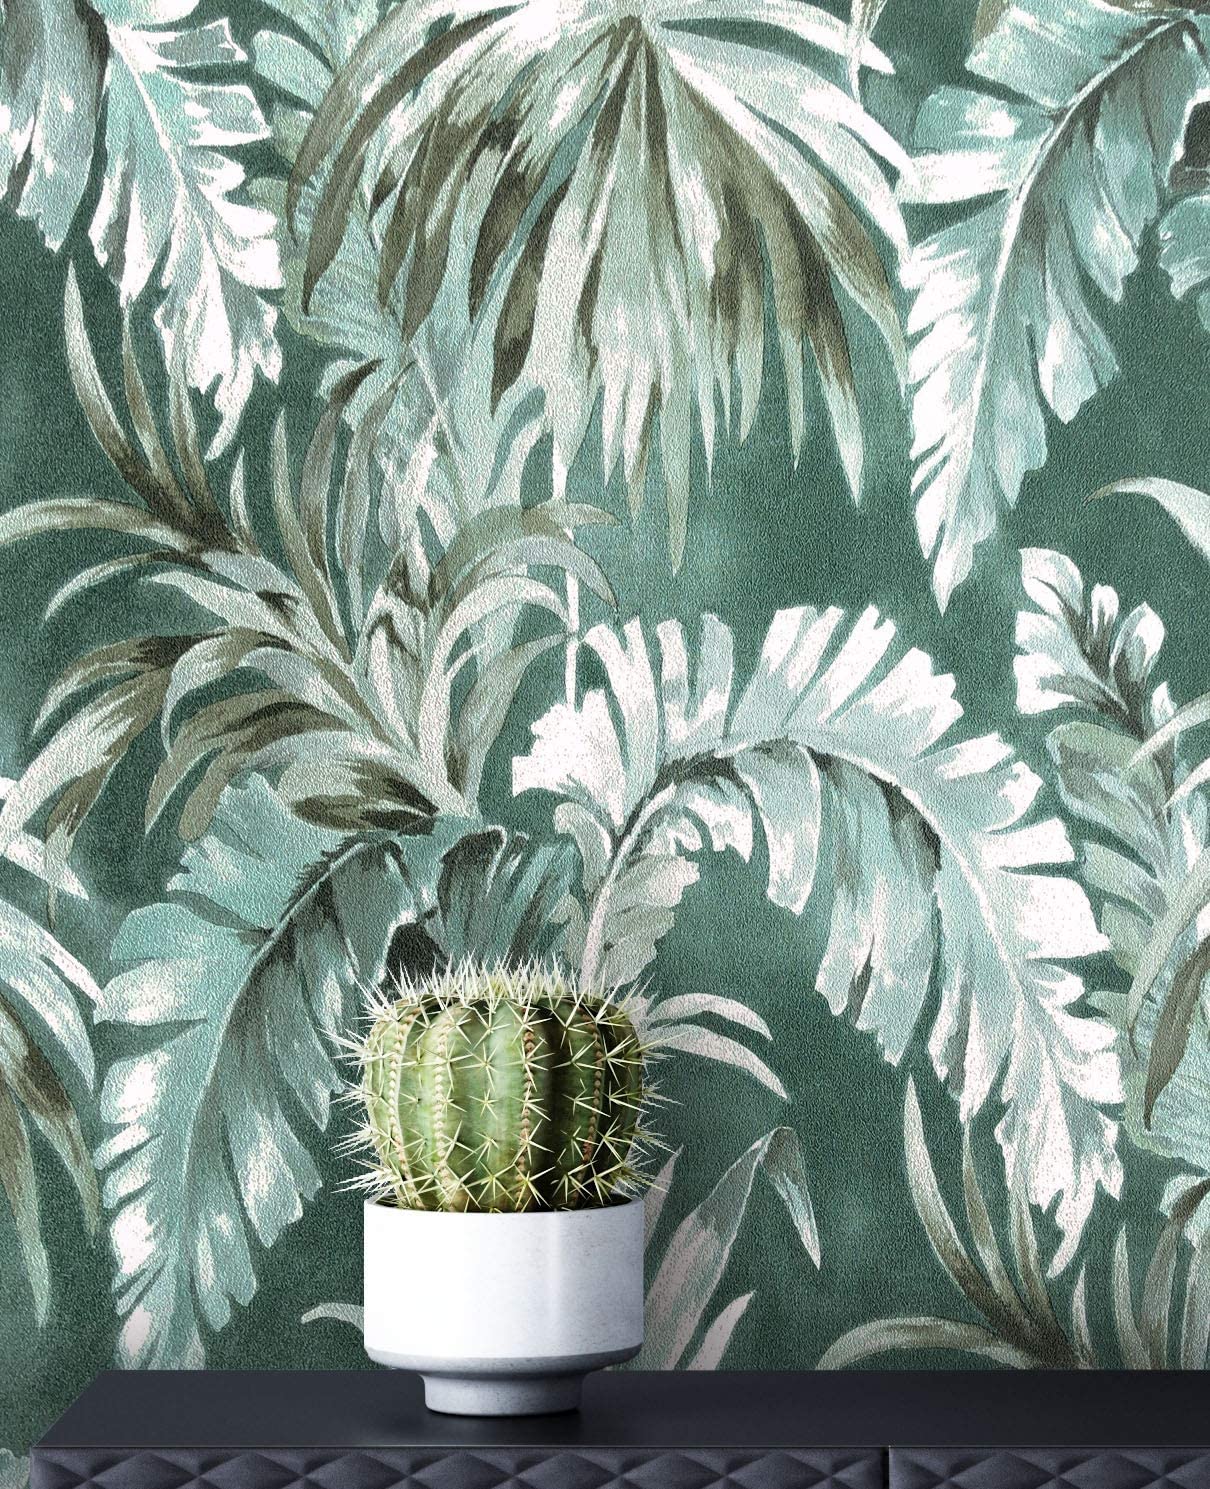 Newroom Design Newroom Non-Woven Wallpaper Modern Jungle Palm Trees Green with Wallpaper G